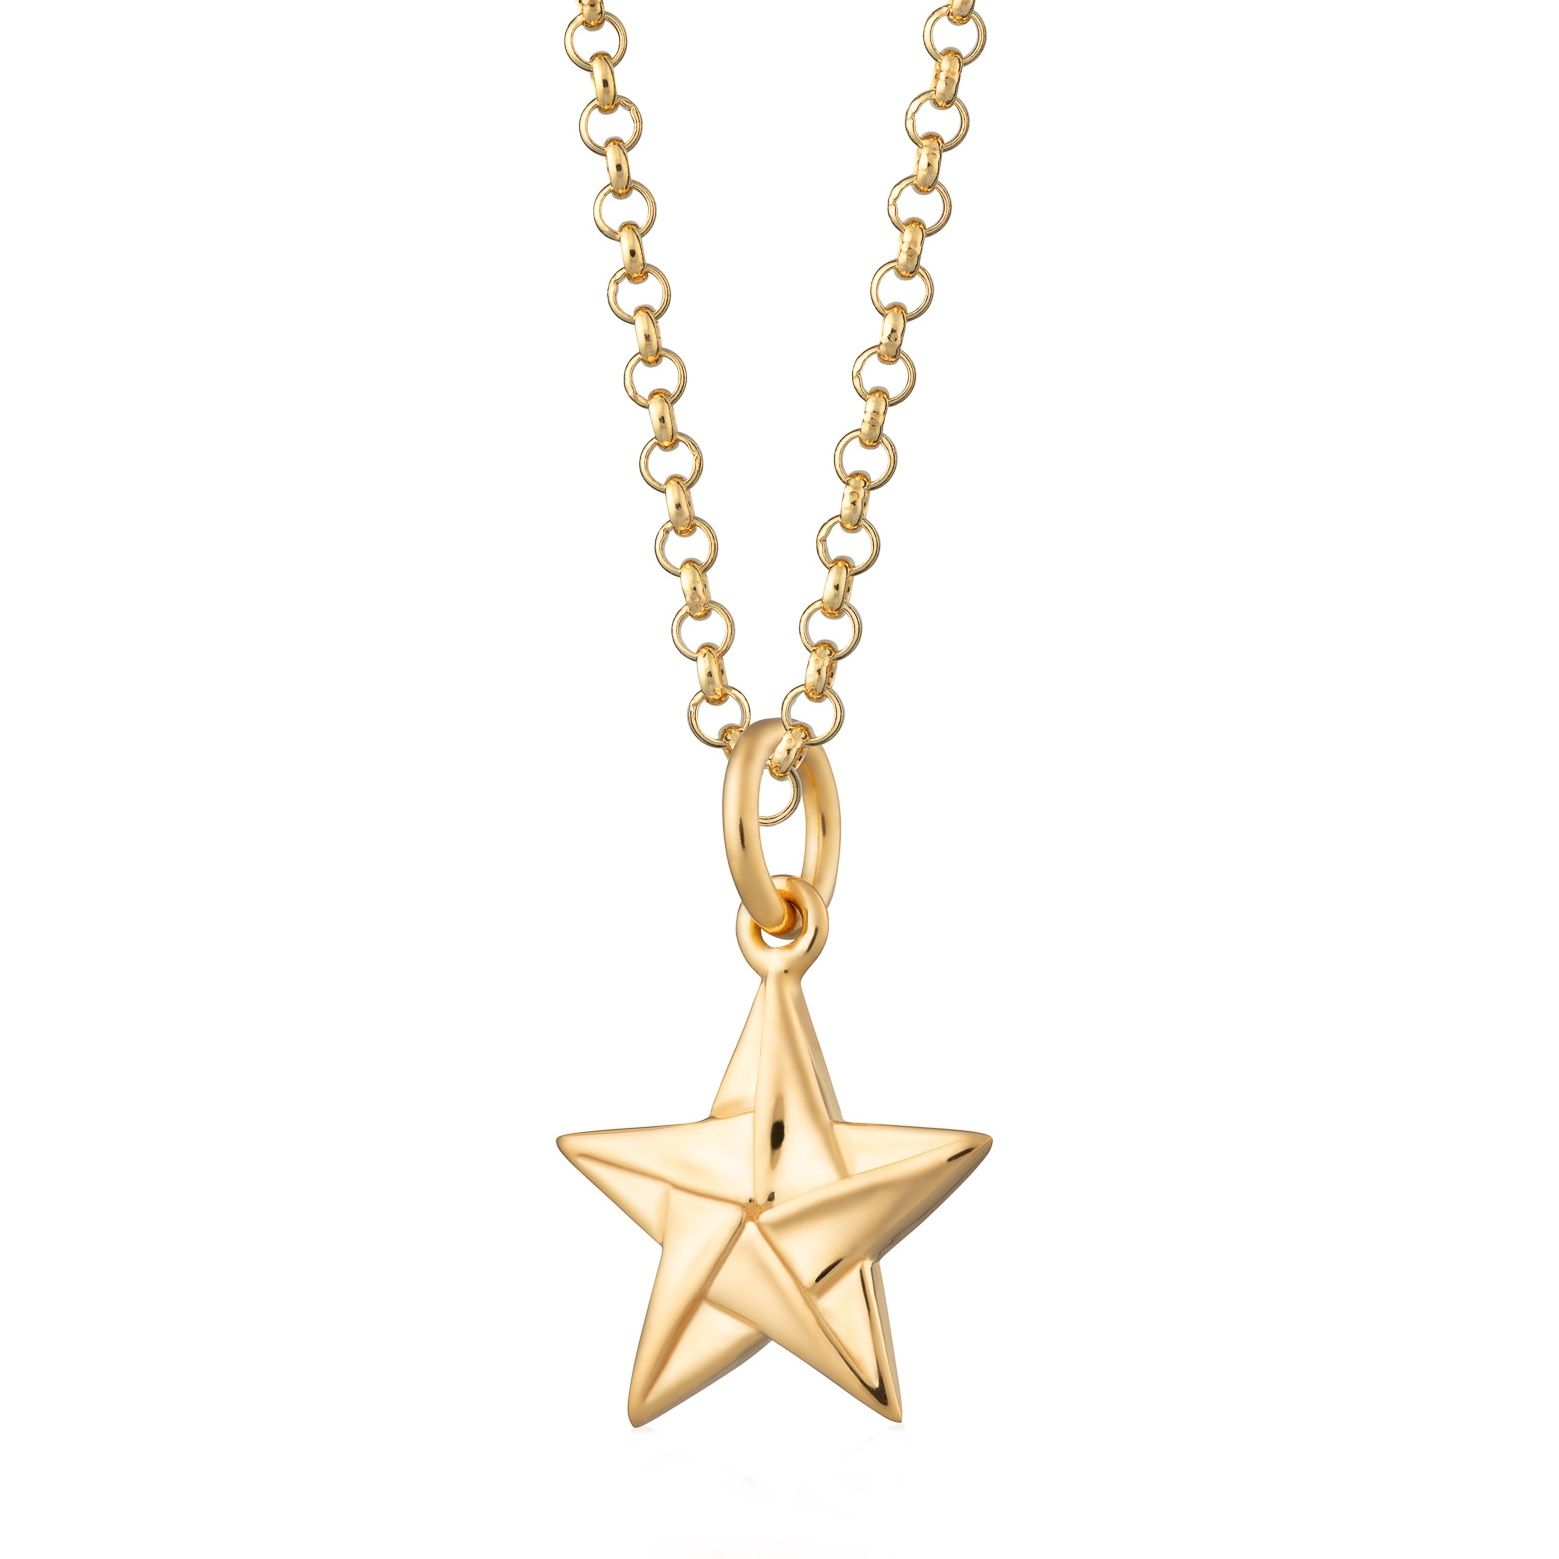 Origami Star Necklace